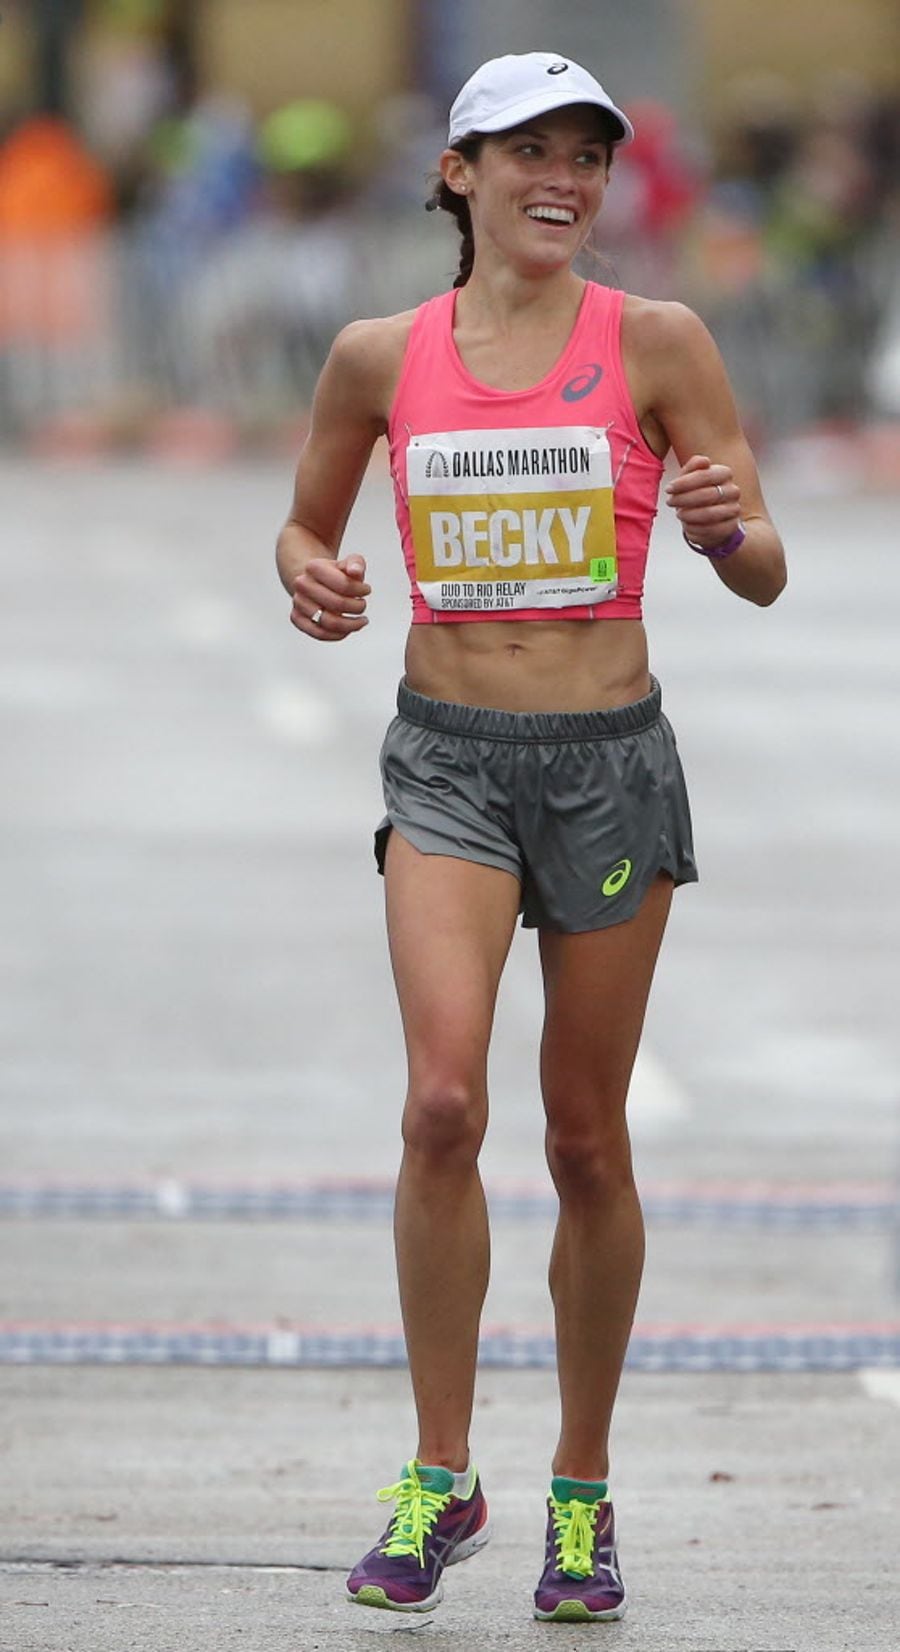 Becky Wade participating in the Dallas Marathon's Duo to Rio Relay on December 13, 2015.